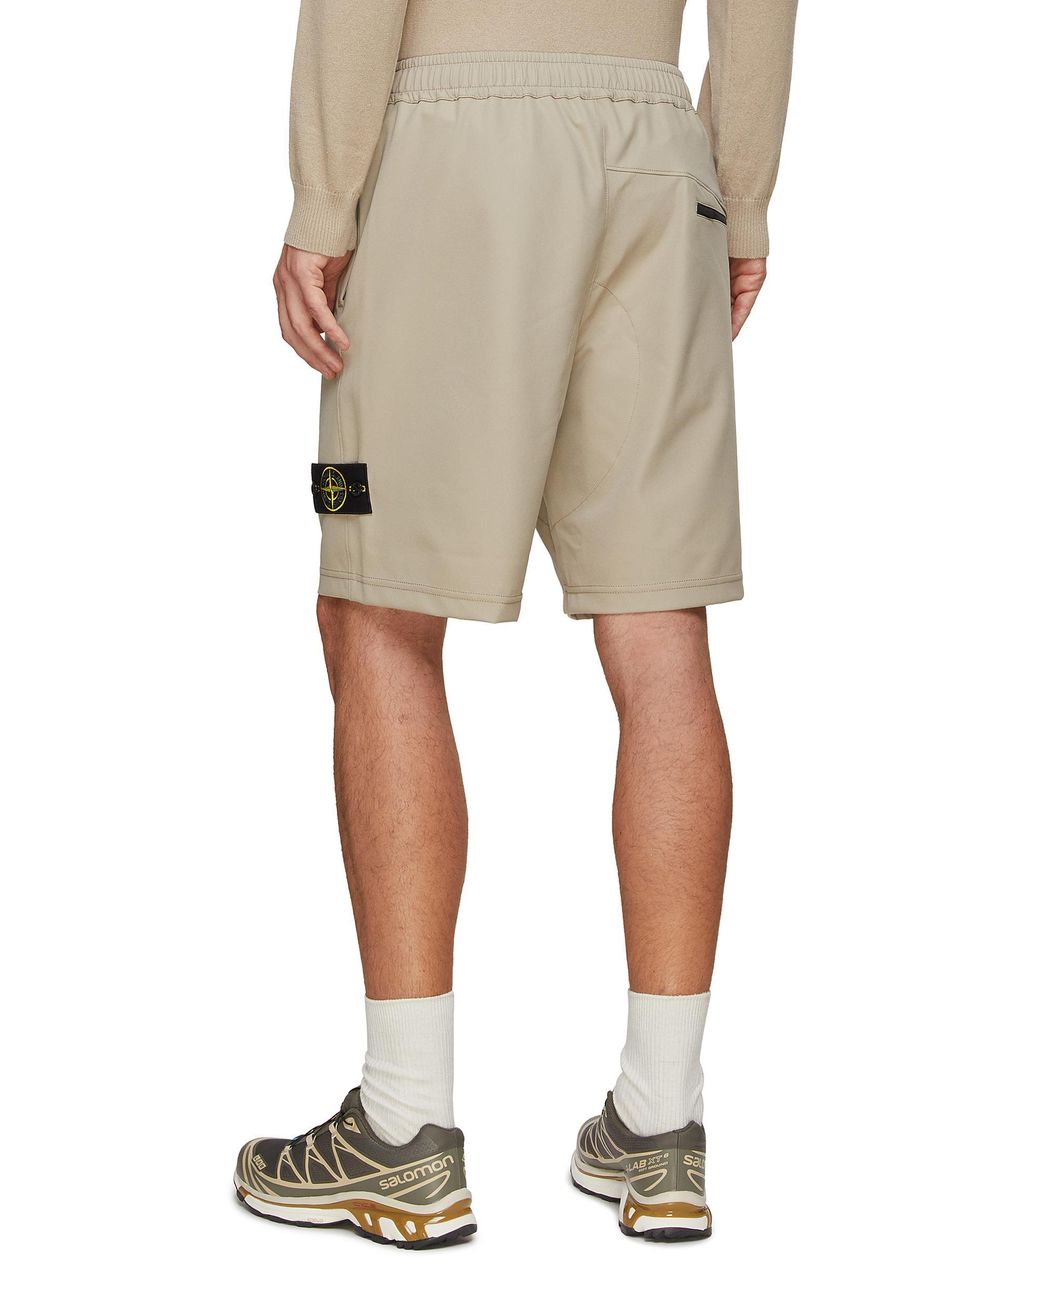 Stone Island Compass Logo Patch Bermuda Sweatshorts in Natural for Men |  Lyst